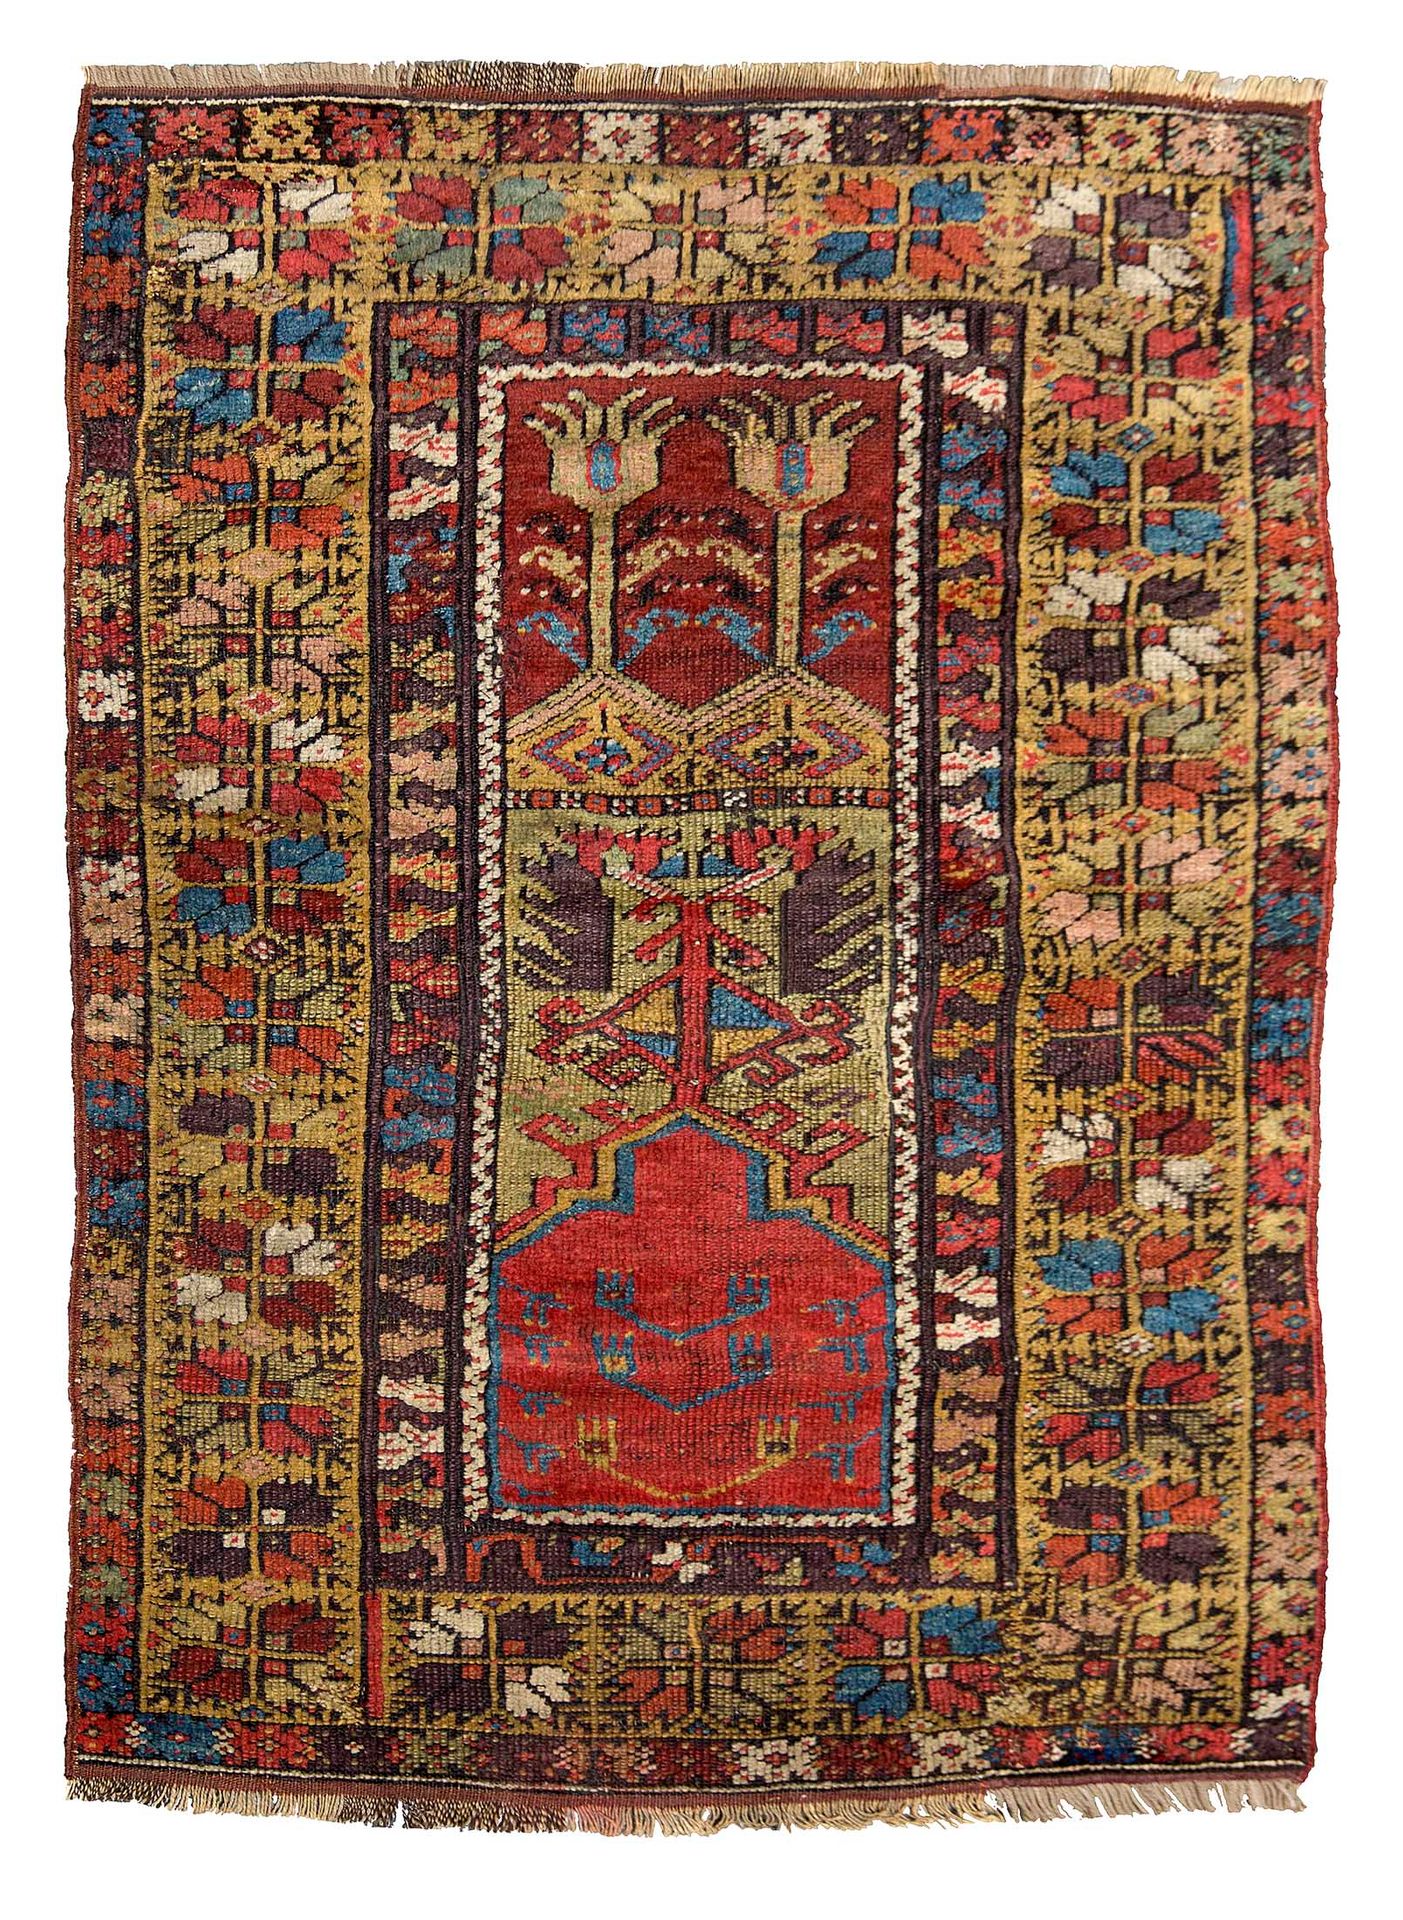 Null MUCUR (MOUDJOUR) carpet (Asia Minor), late 19th, early 20th century
Dimensi&hellip;